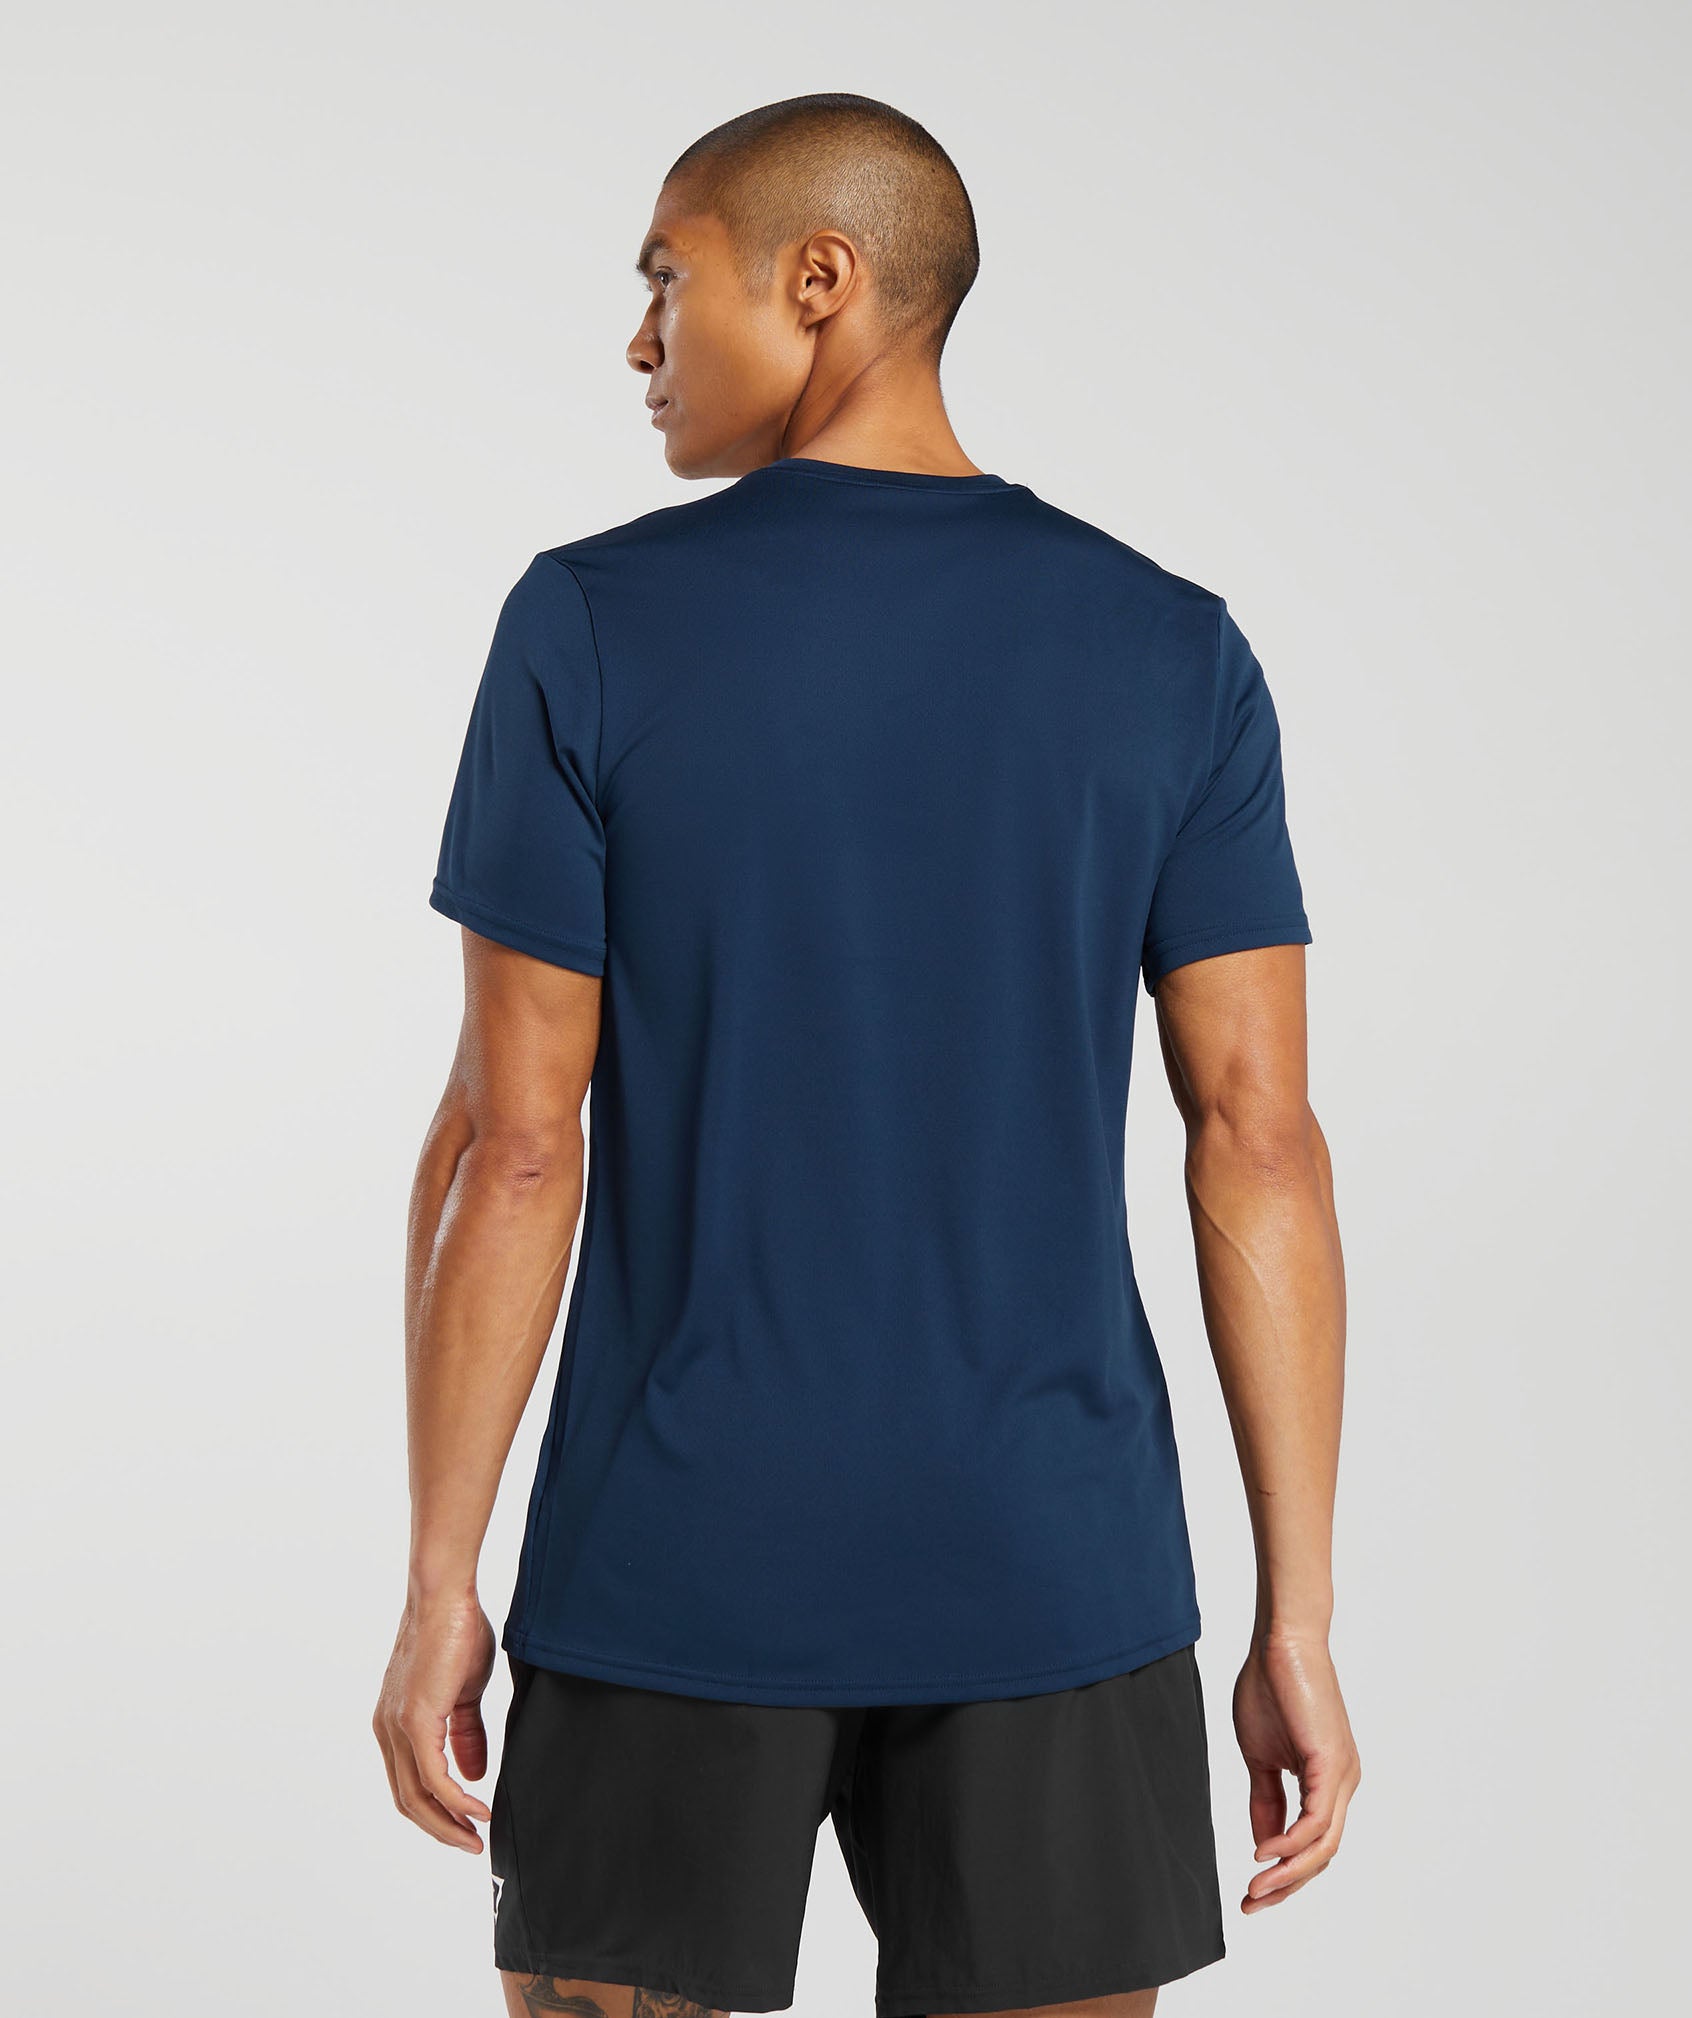 Arrival T-Shirt in Navy - view 2